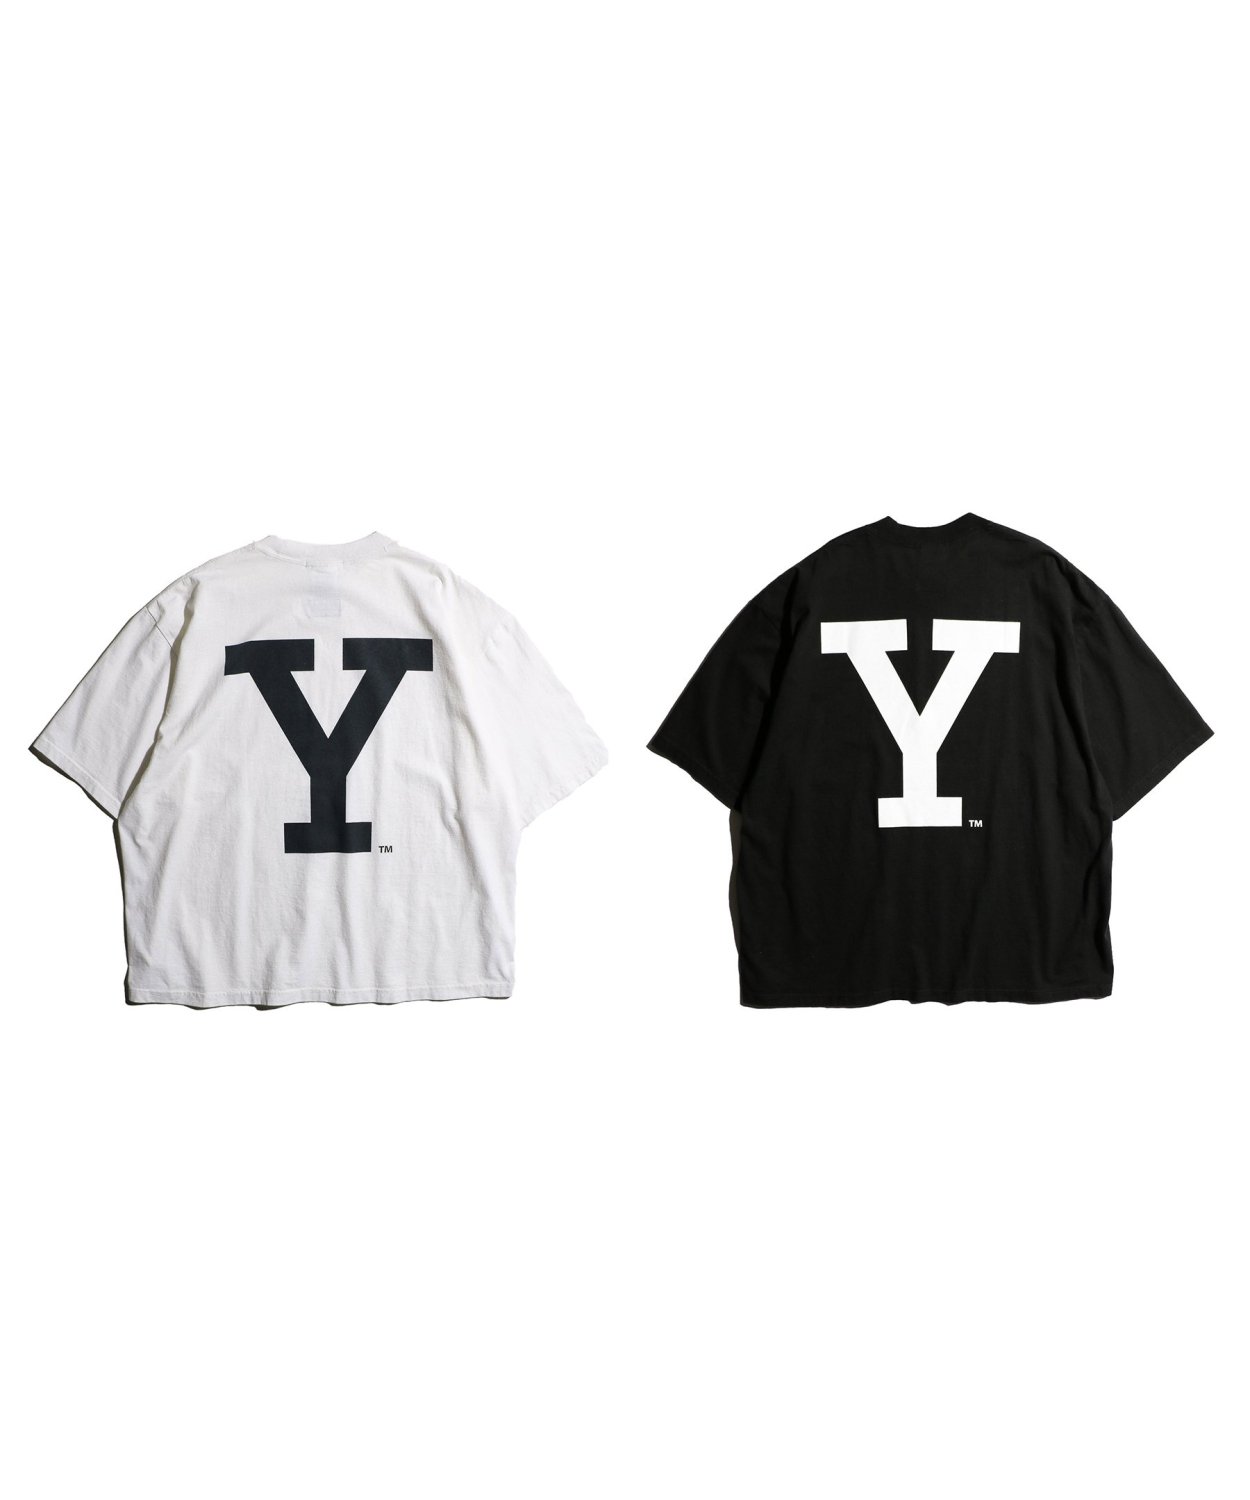 The BOOK STORE / YALE BACK LOGO SS TEE